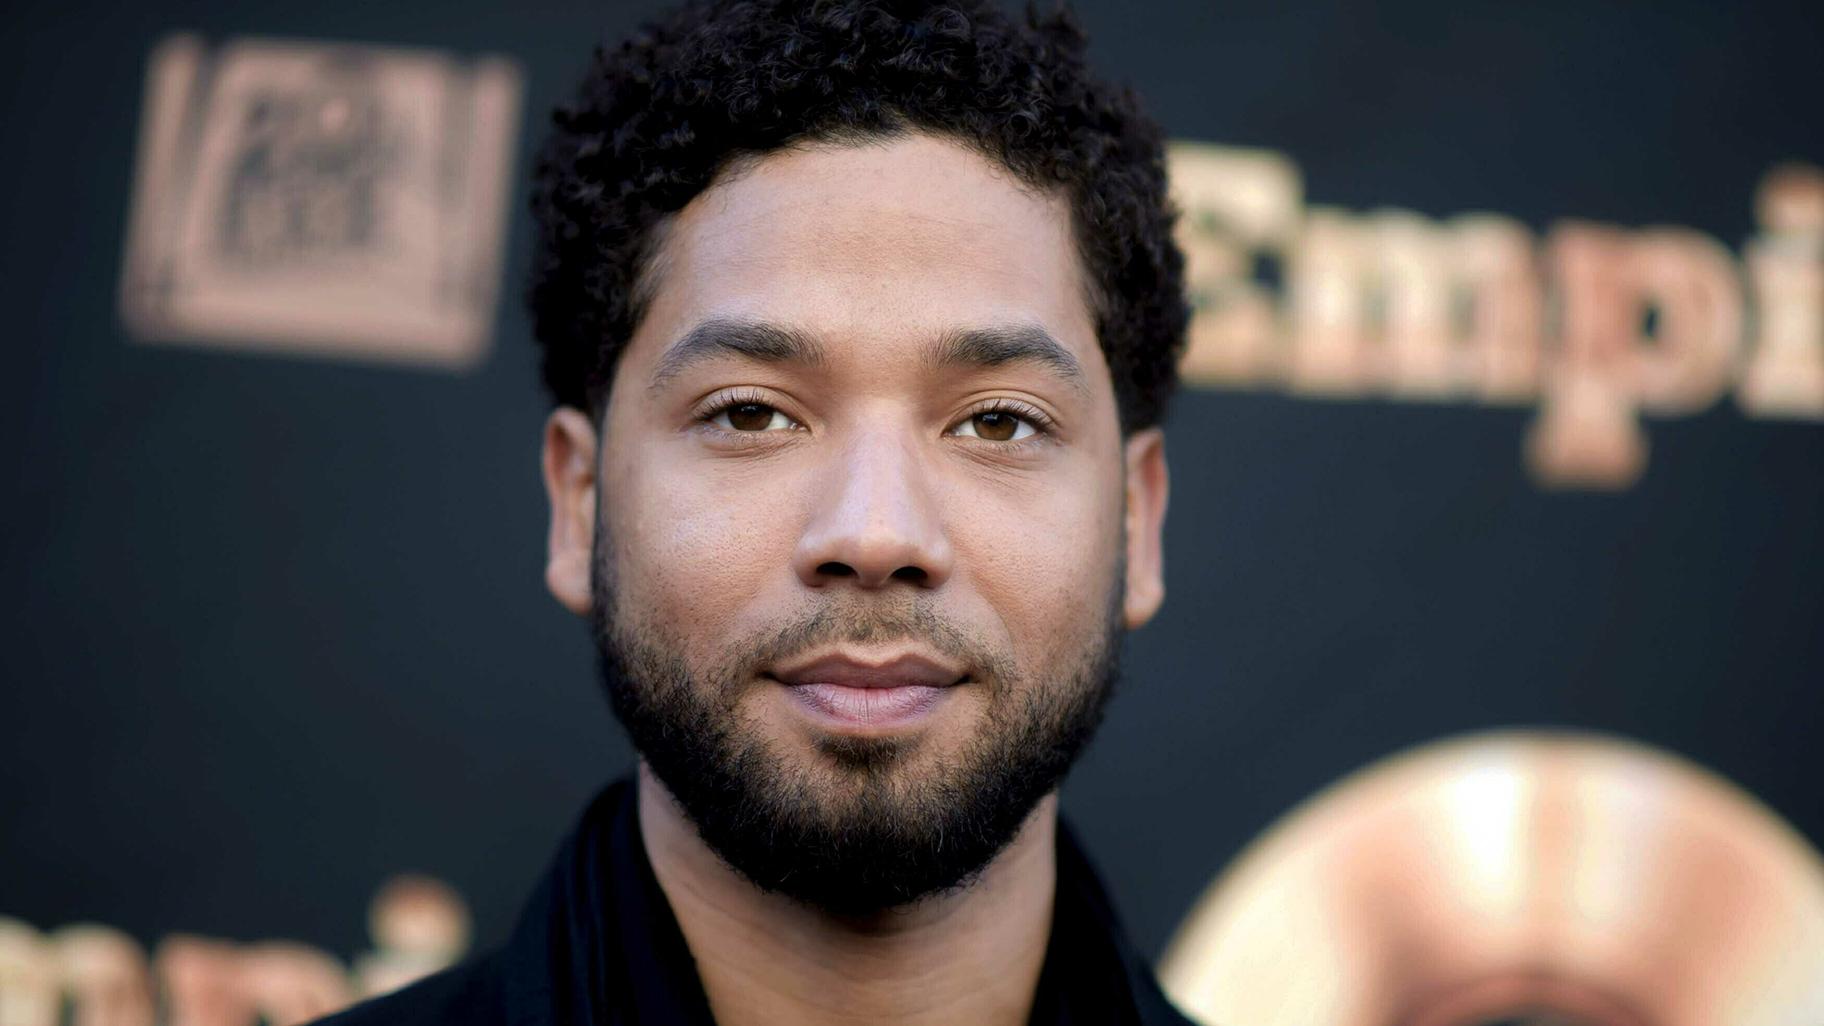 In this May 20, 2016 file photo, actor and singer Jussie Smollett attends the “Empire” FYC Event in Los Angeles. (Richard Shotwell / Invision / AP, File)